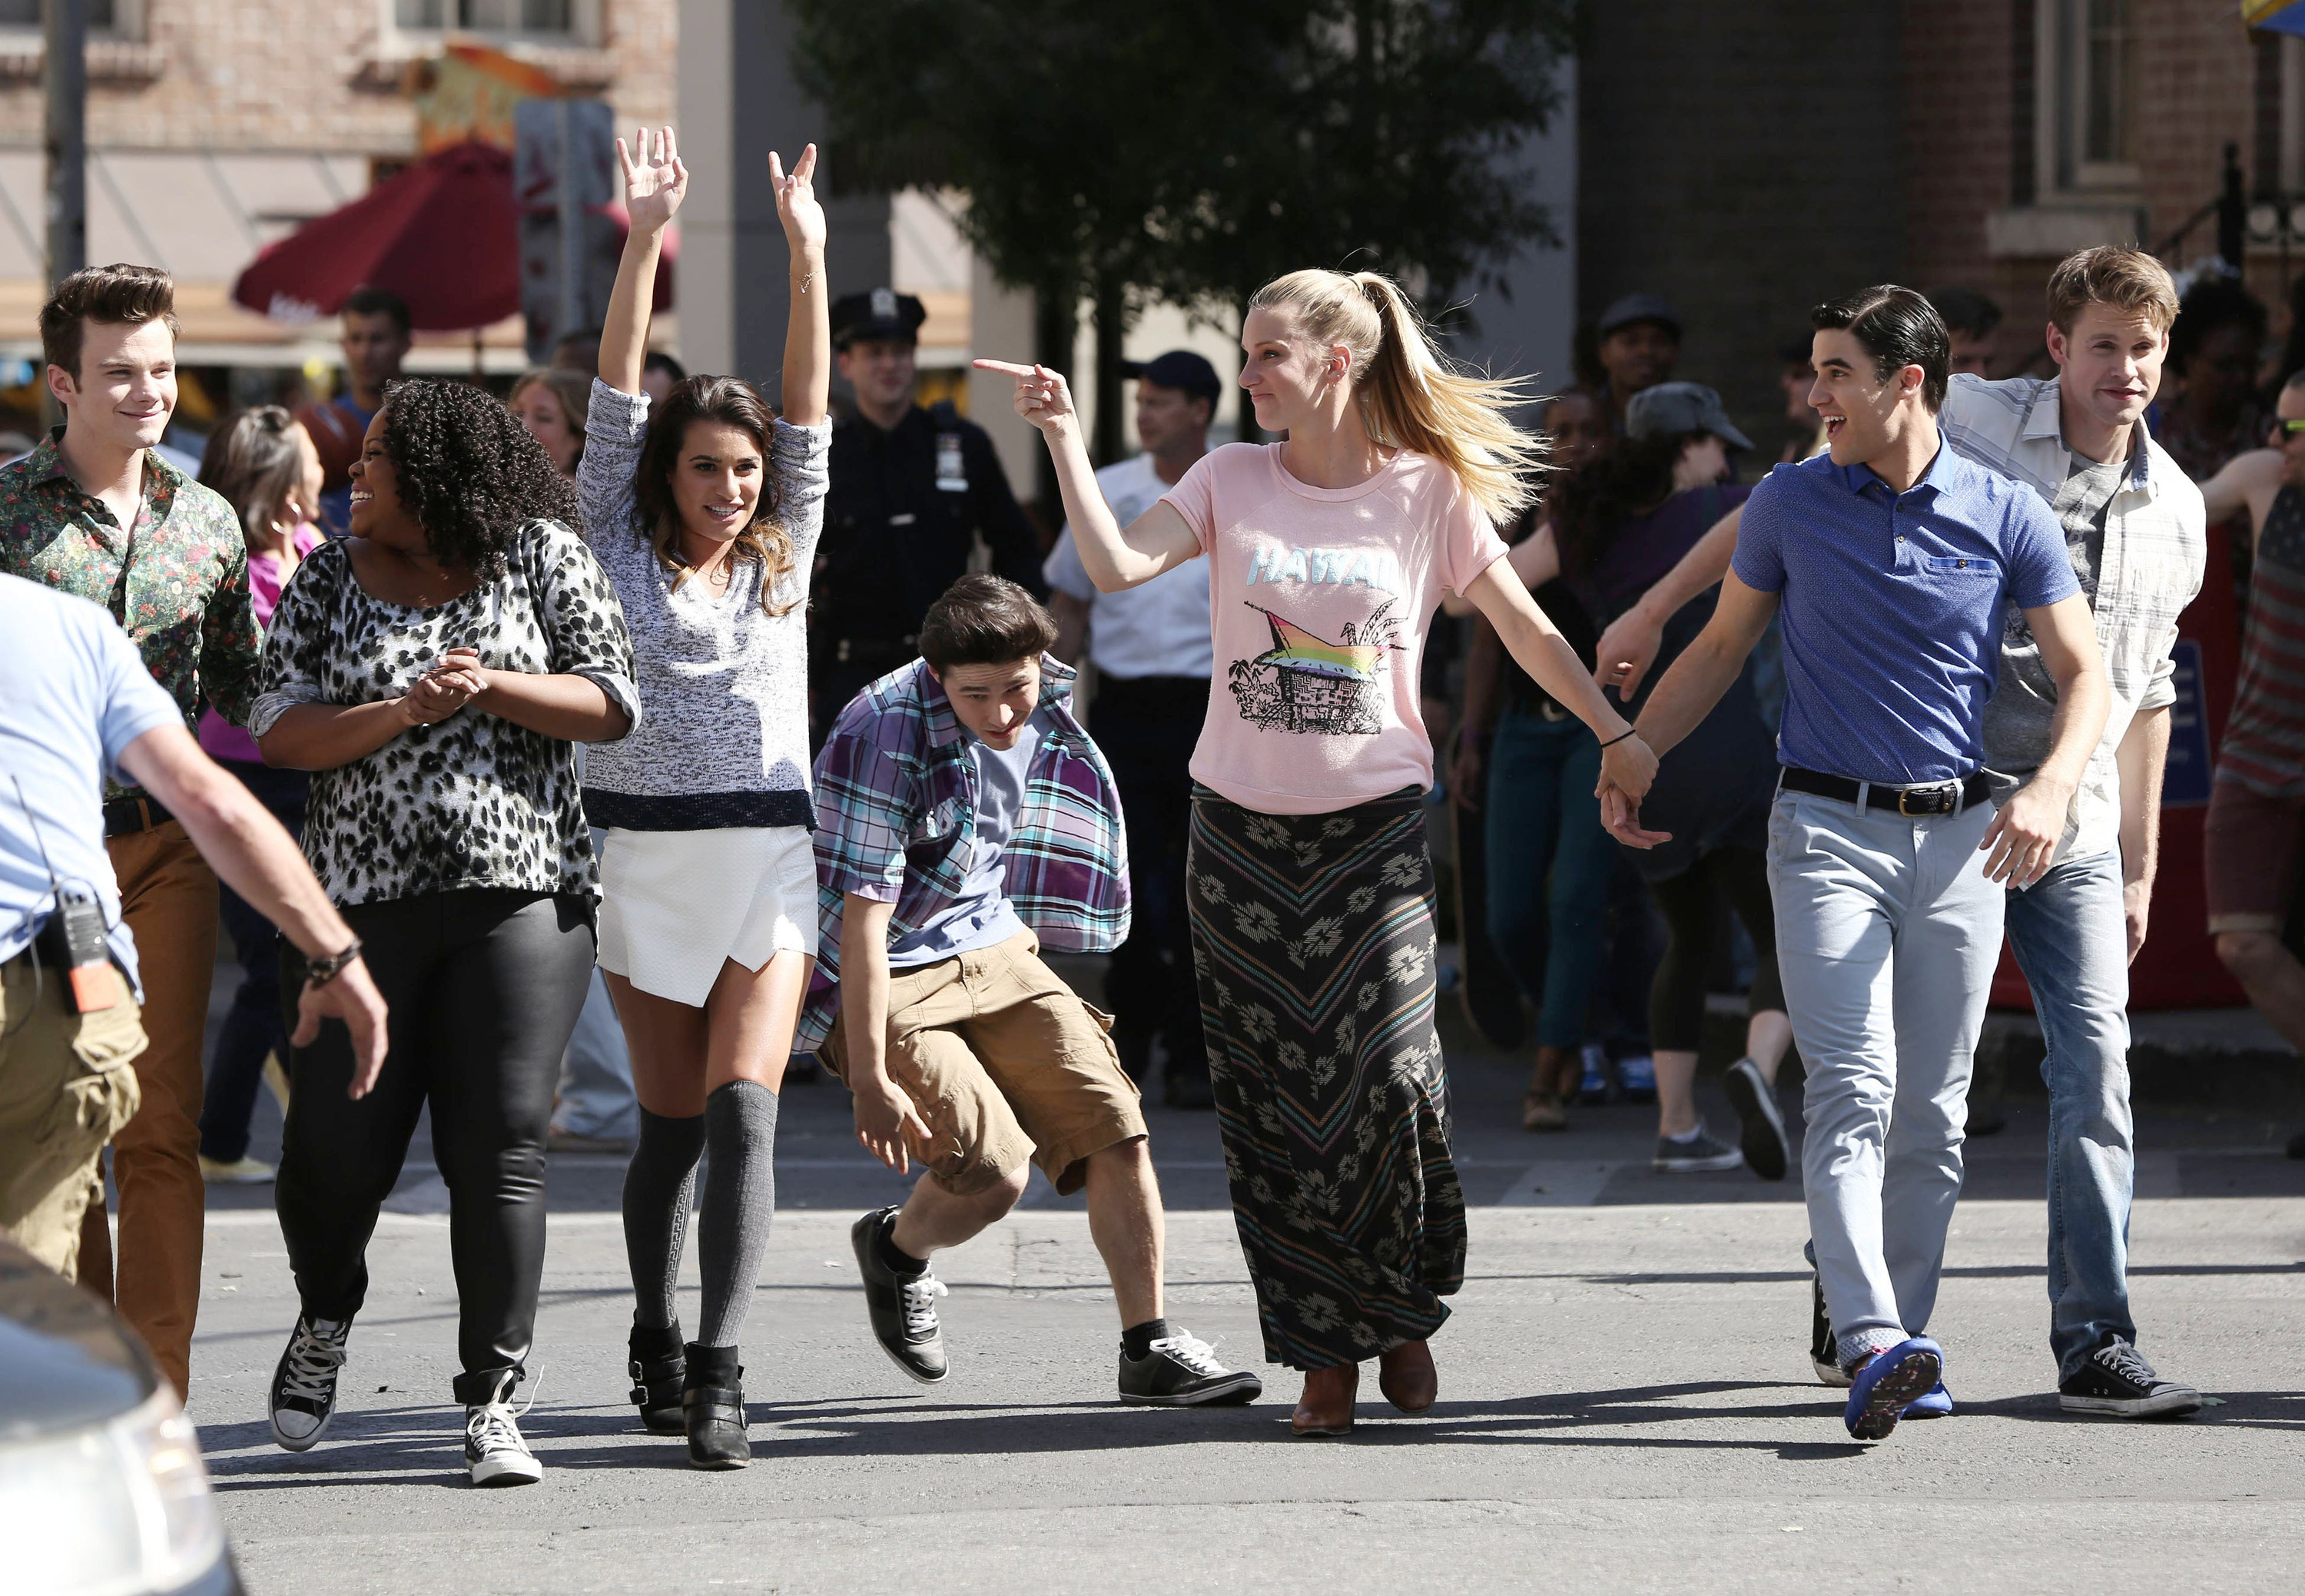 the cast dancing and walking down the street